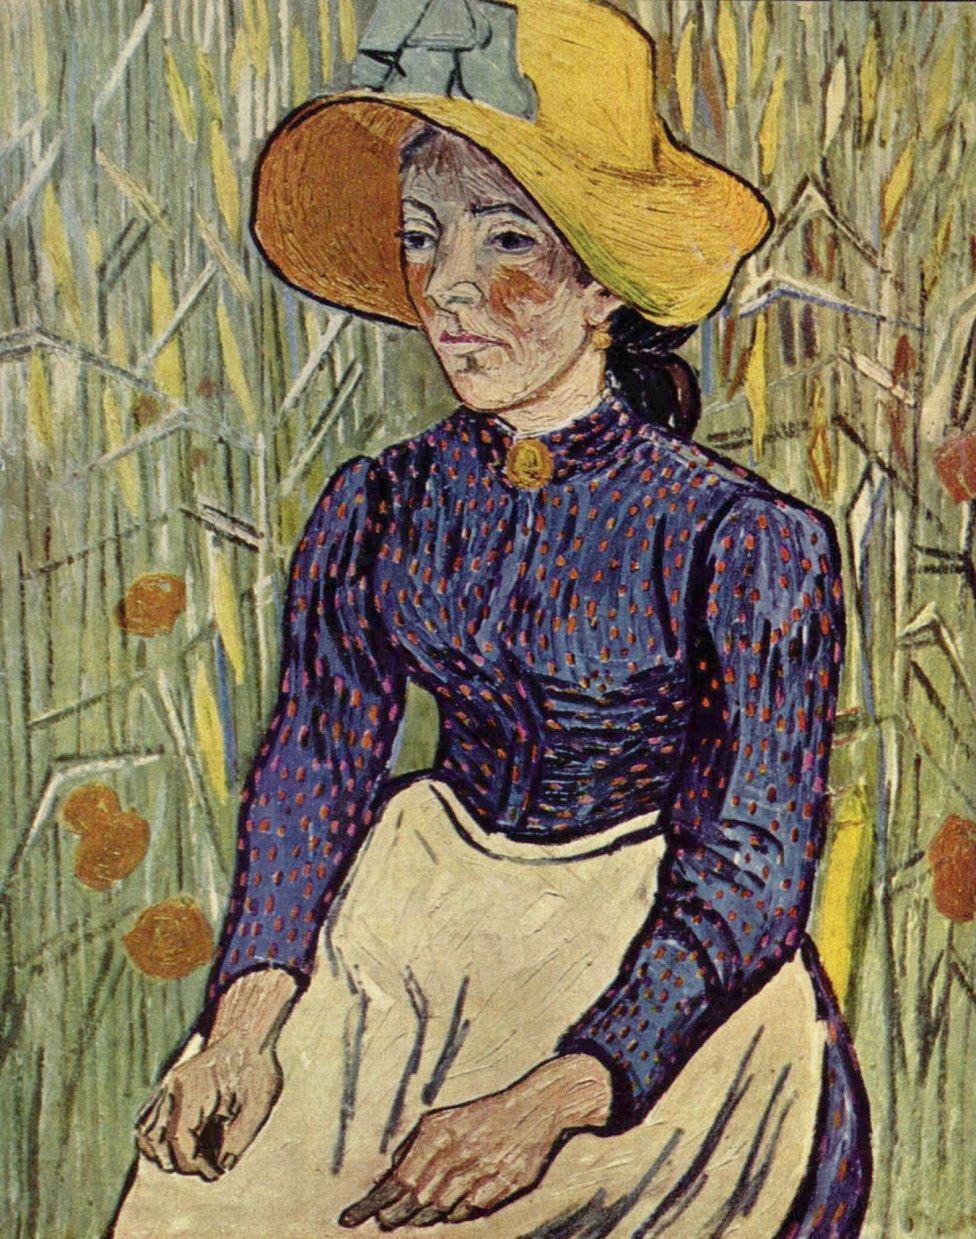 van gogh peasant woman against a background of wheat drawingfineart